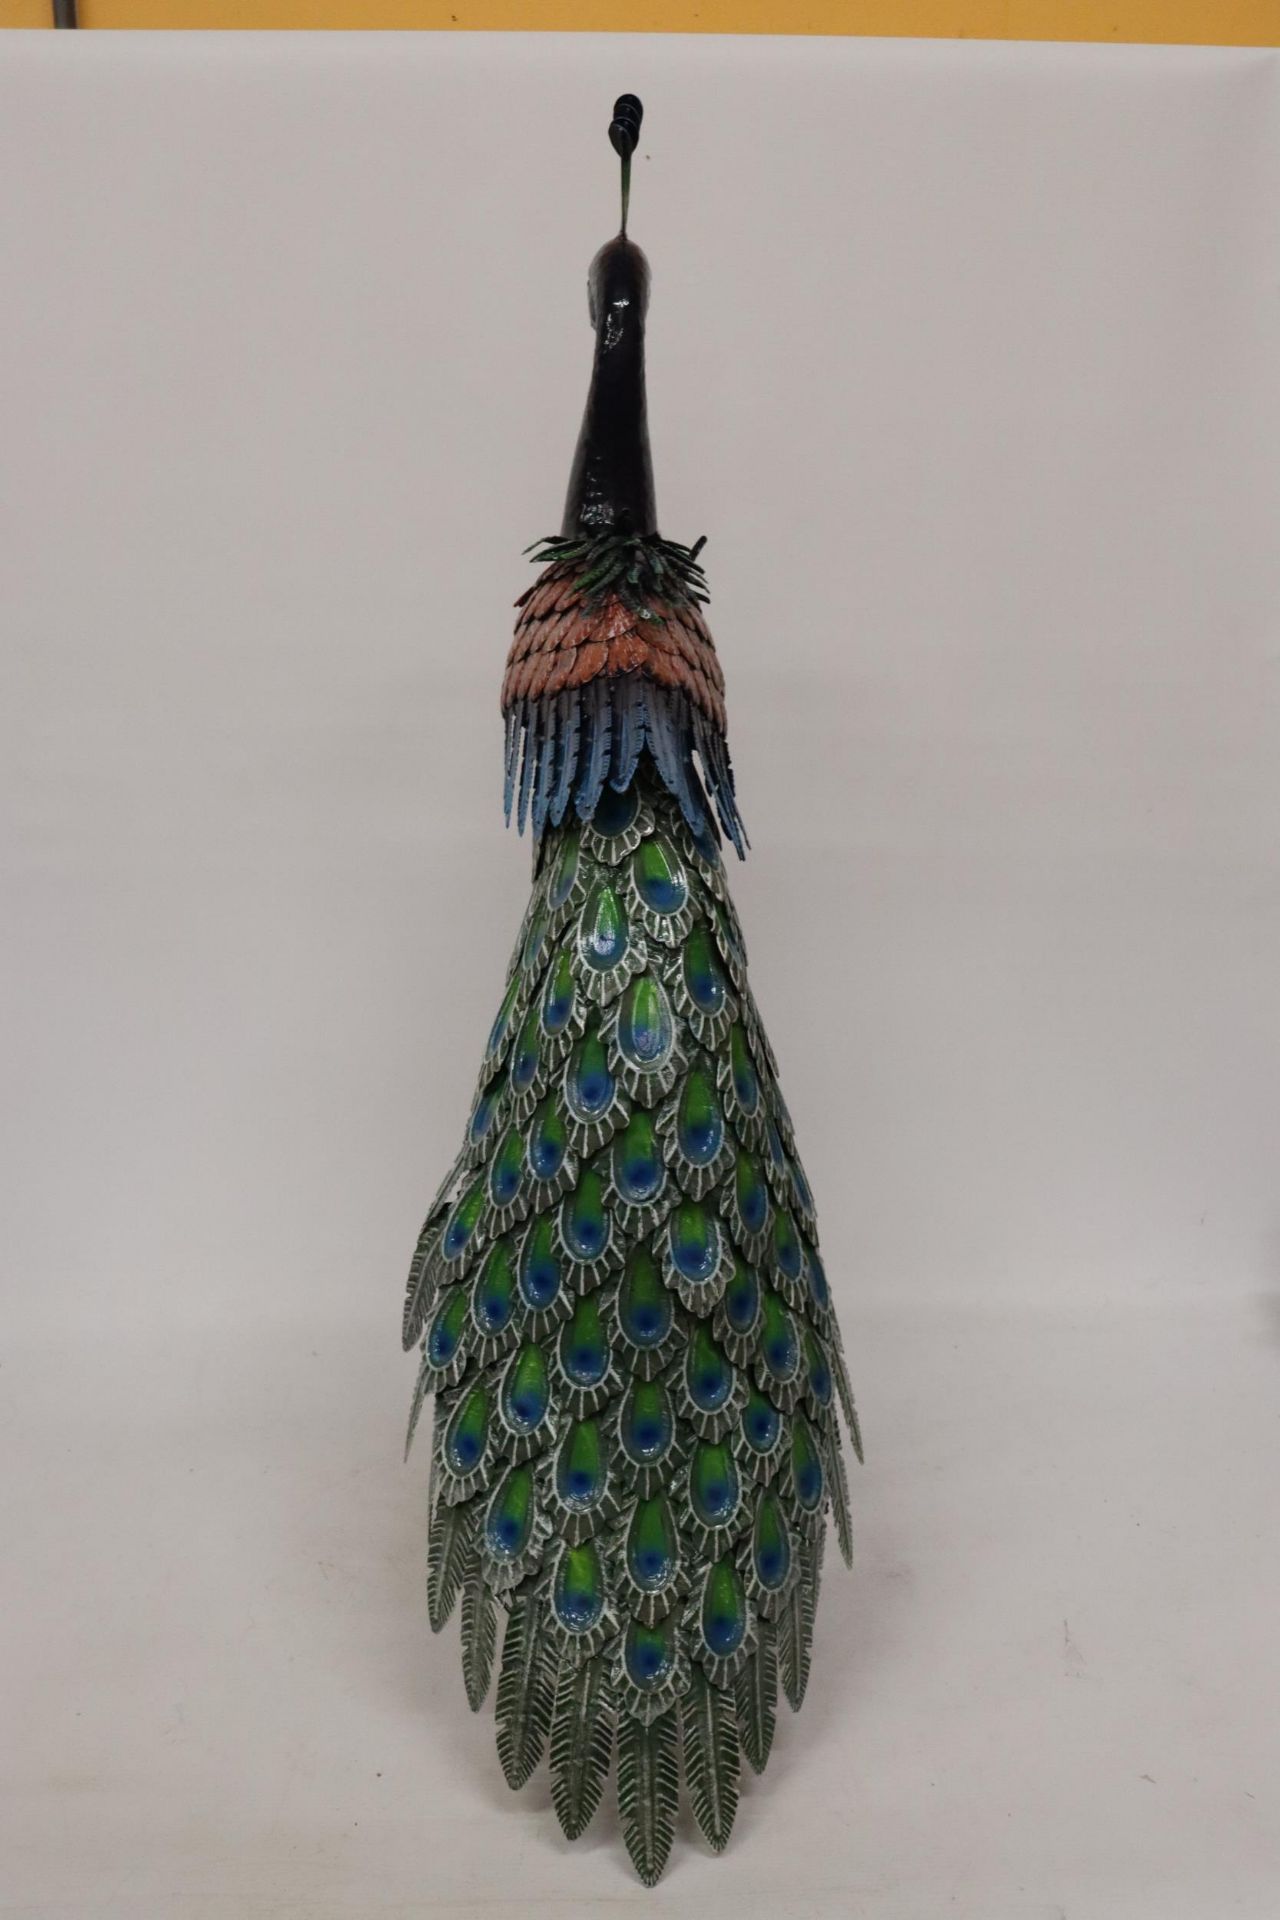 A HEAVY METAL PAINTED PEACOCK GARDEN ORNAMENT, 1 METRE HIGH - Image 5 of 8